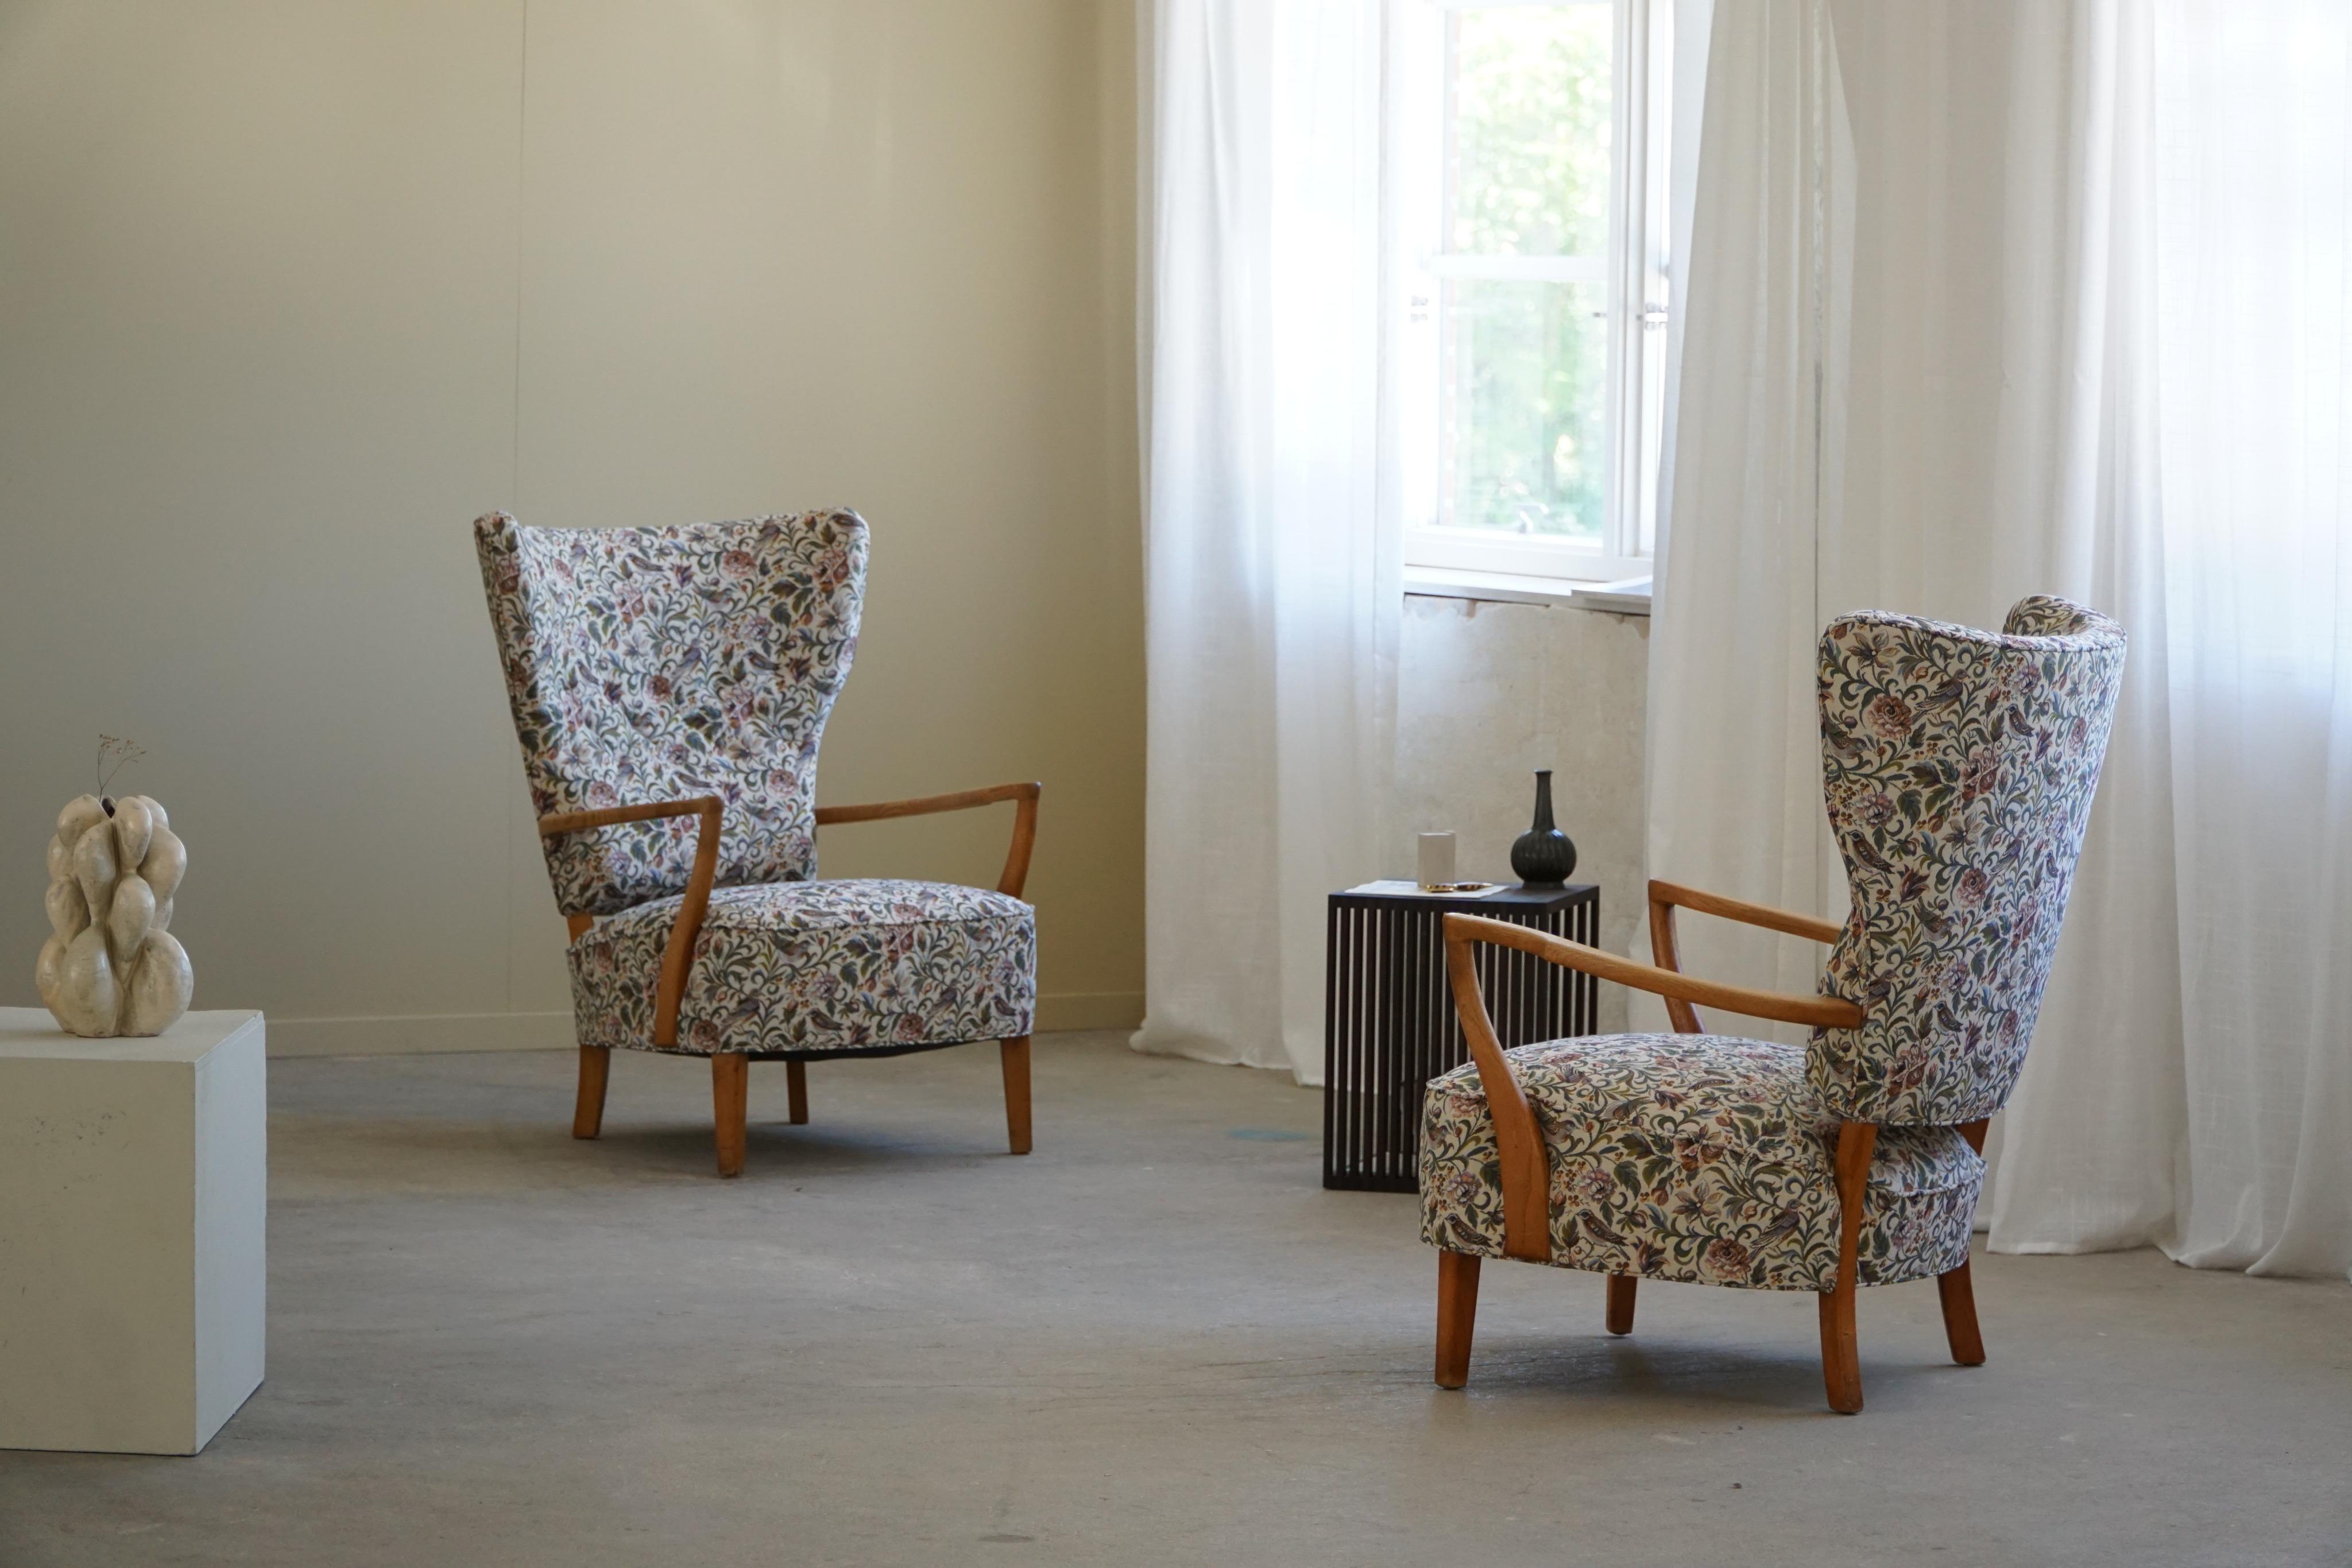 Presenting a stunning pair of lounge chairs from the 1950s, expertly crafted in oak and thoughtfully reupholstered with a touch of nostalgia using style fabric from the vibrant 1990s. Drawing inspiration from the iconic designs of Danish architect